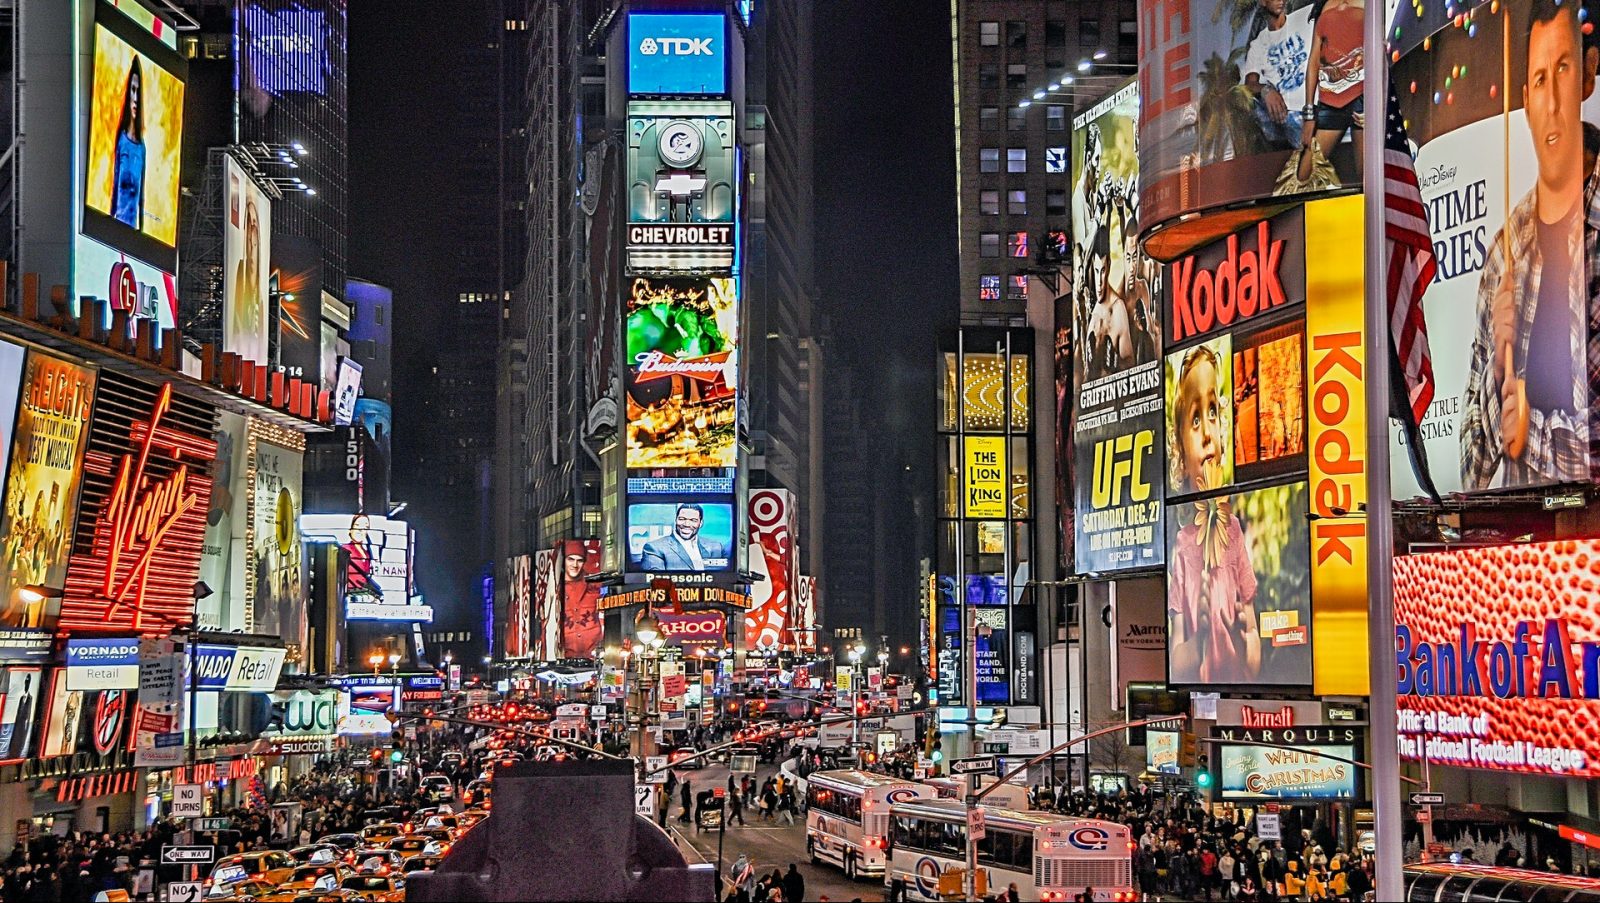 Bright and colorful lights shine from numerous billboards in Times Square into the night sky in New York, USA. Image: Pexels/Jose Francisco Fernandez Saura